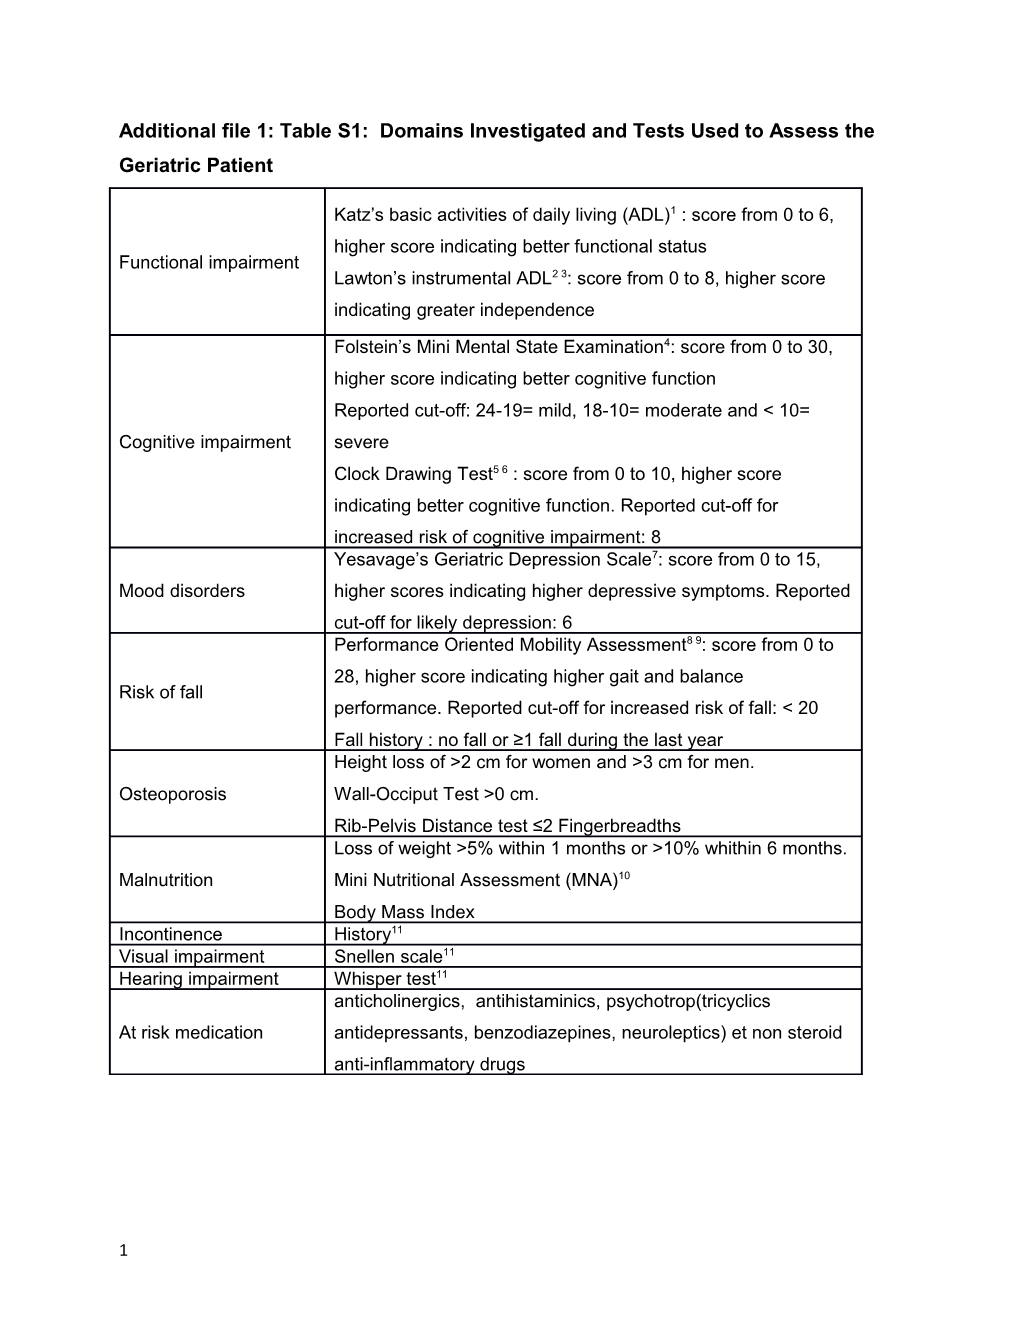 Additional File 1: Table S1: Domains Investigated and Tests Used to Assess the Geriatric